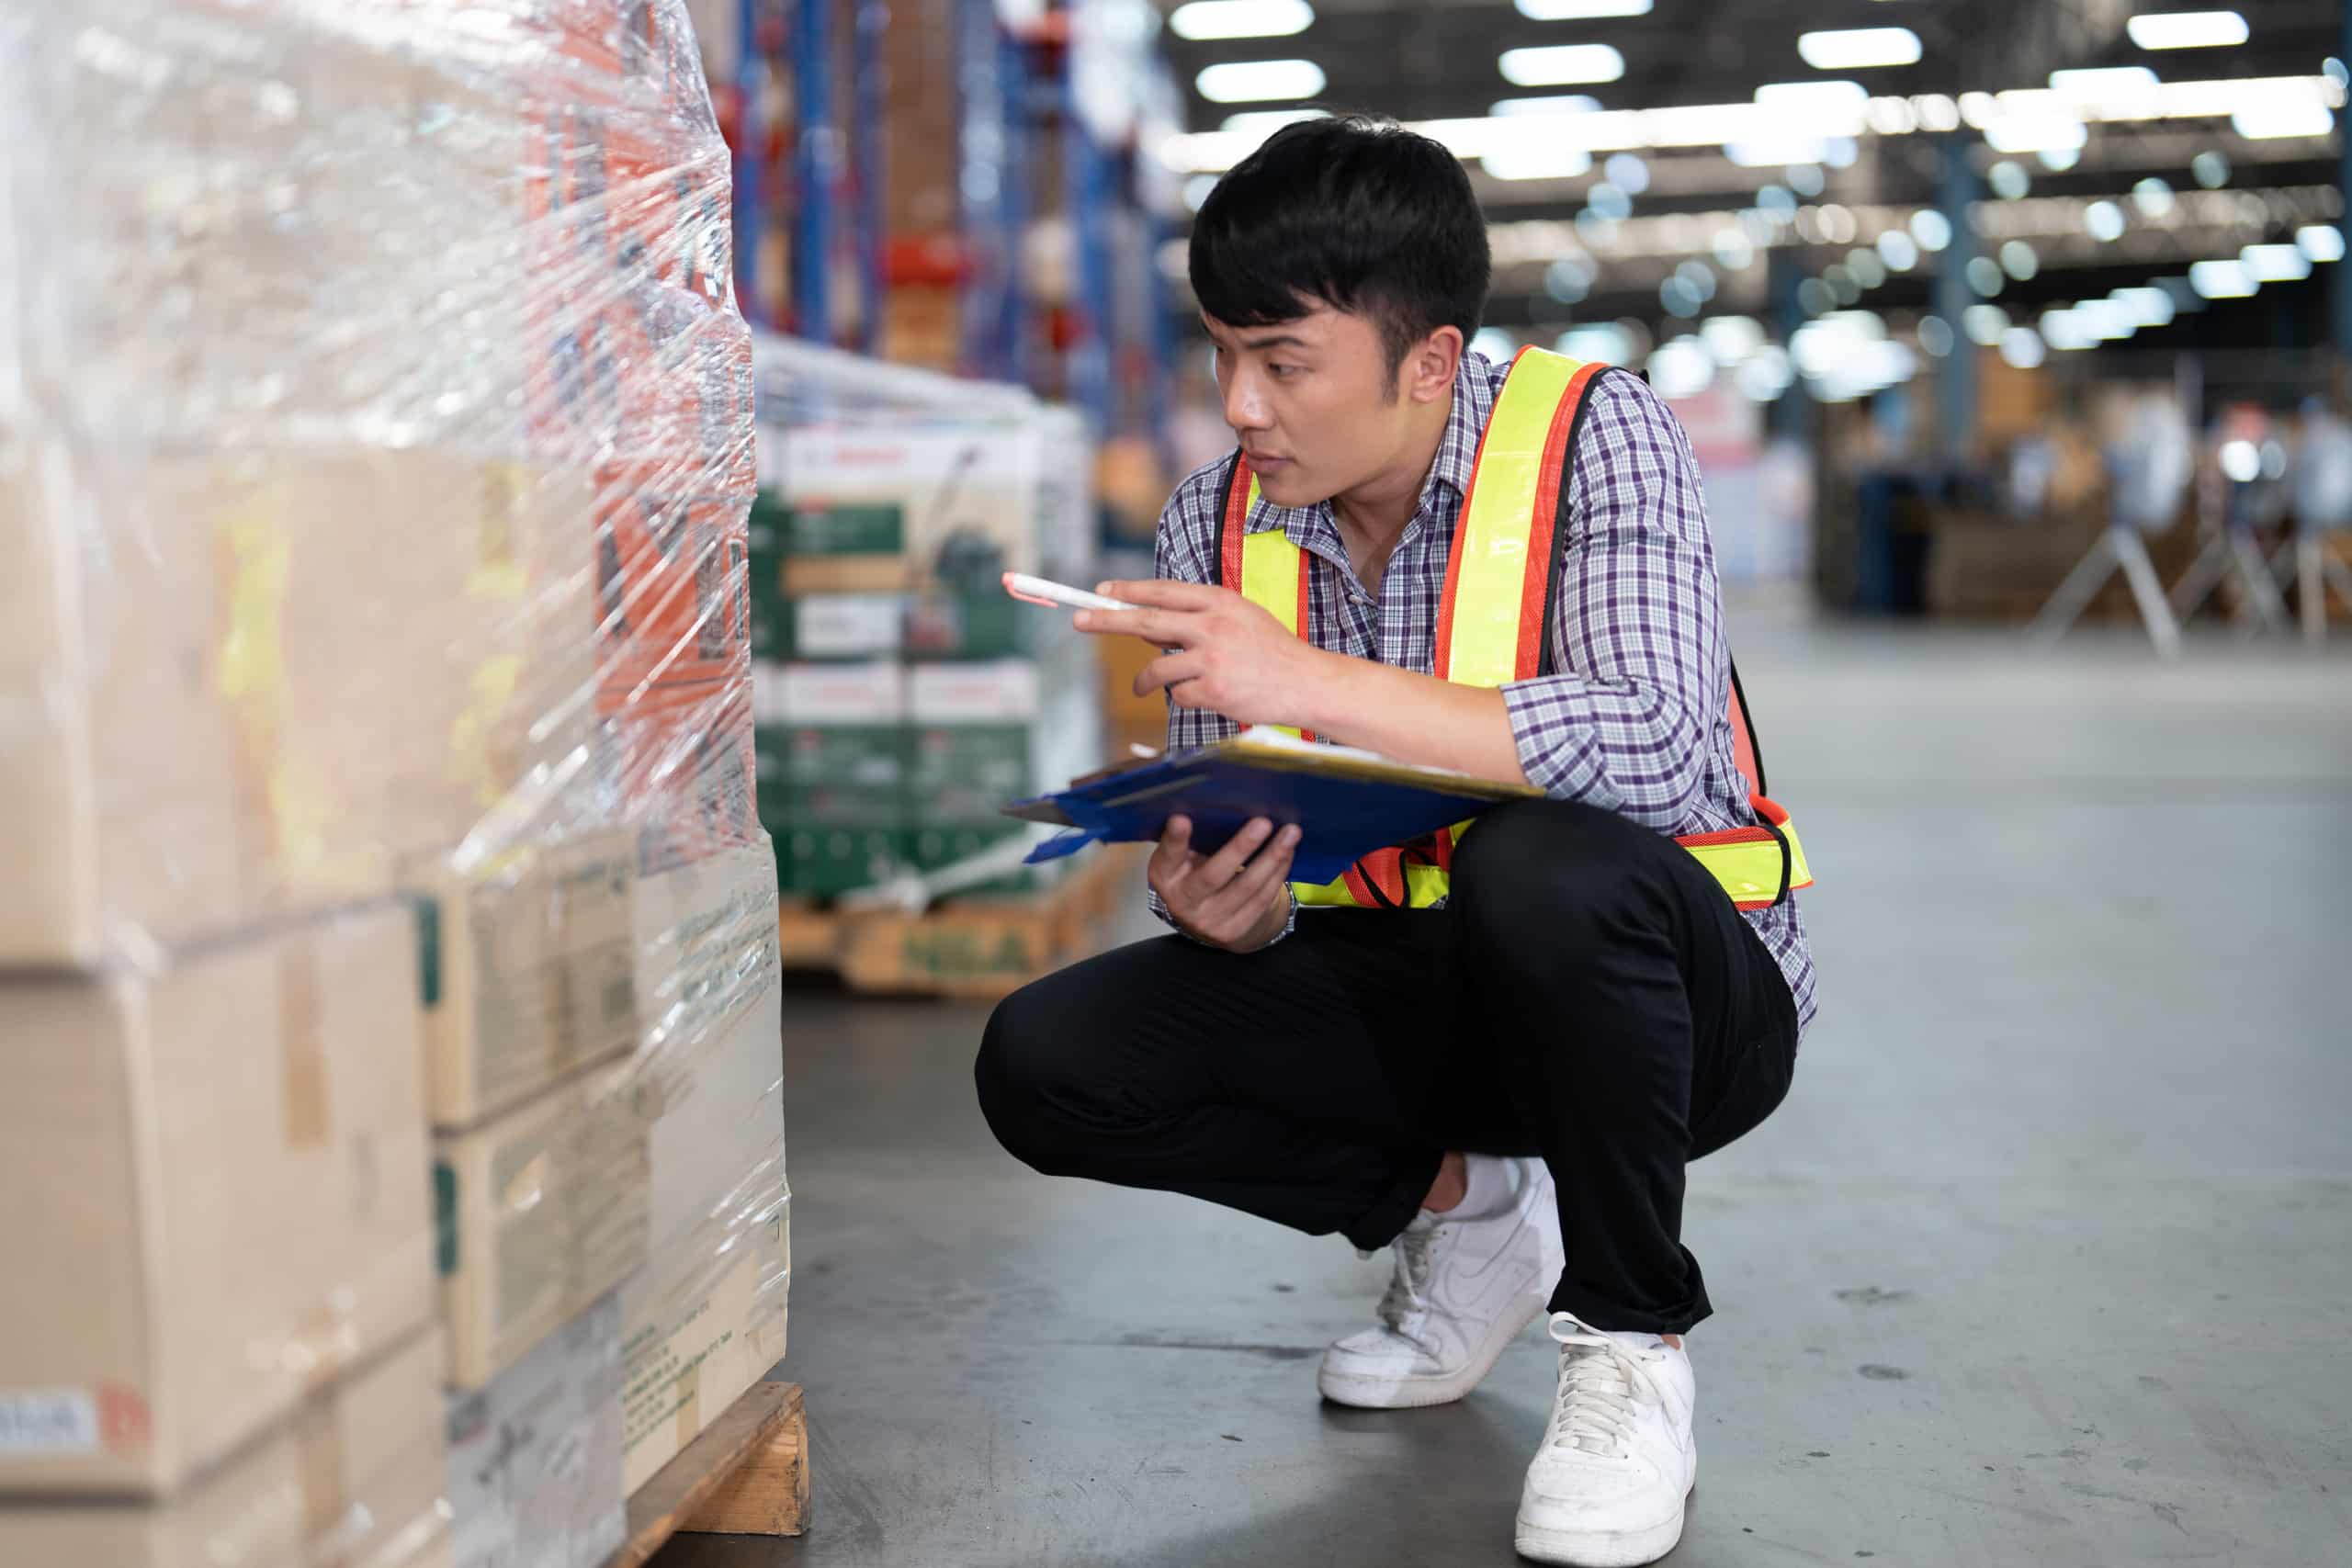 A man in a warehouse holding a clipboard examines the impact of the New Overtime Ruling from the Department of Labor on his business.